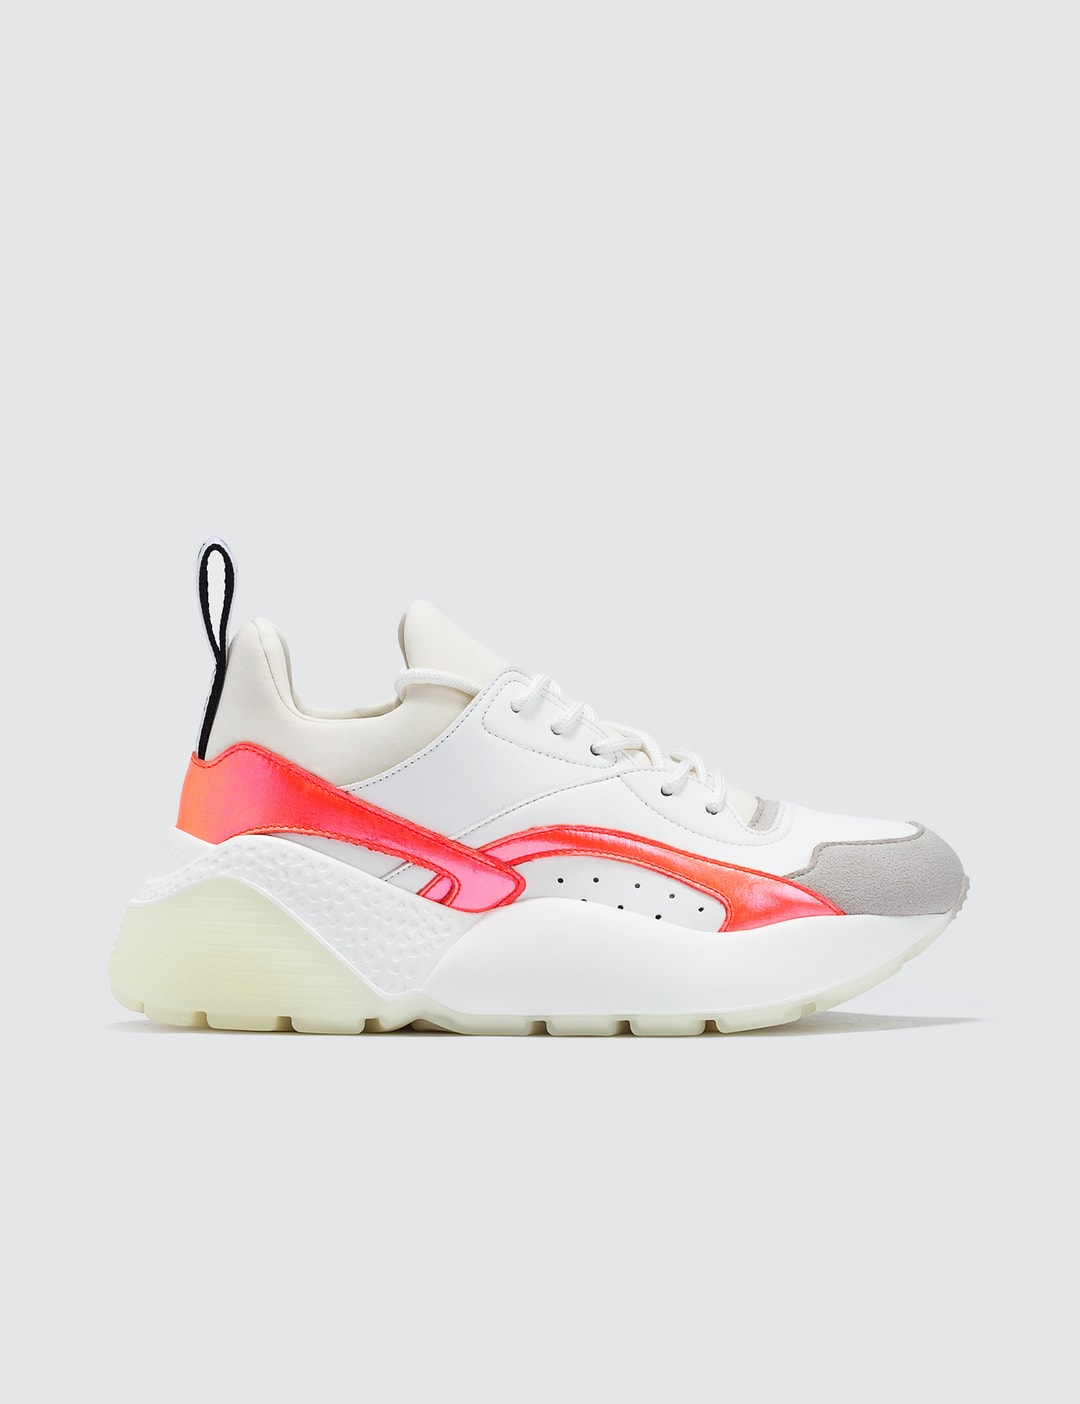 Stella McCartney - Eclypse Sneaker Laces | HBX - Globally Curated ...